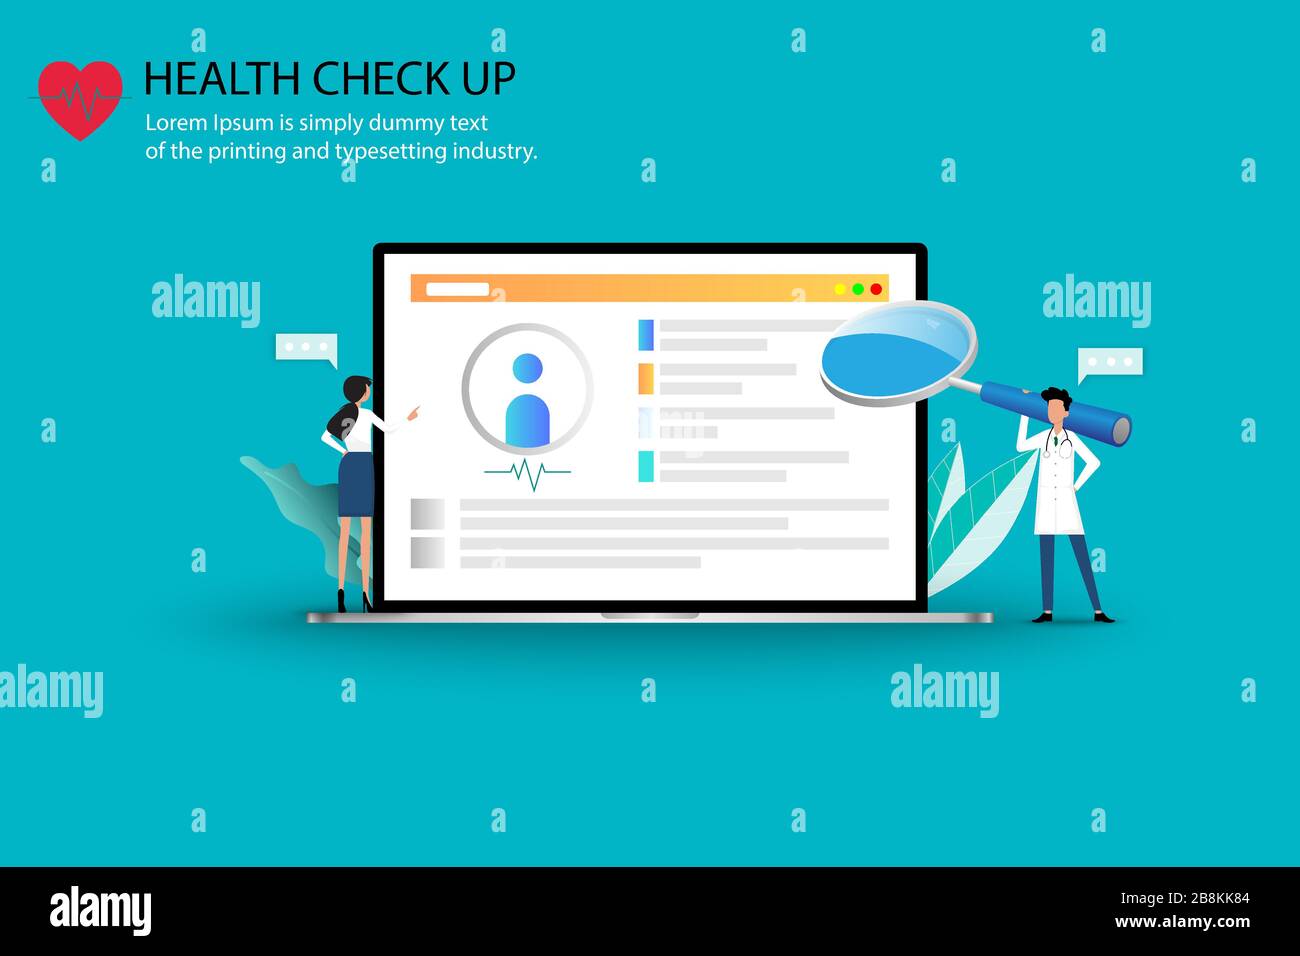 Concept of medical health check up, two doctors are working on a big screen of laptop to monitor, check and treat health of the patients. Stock Vector